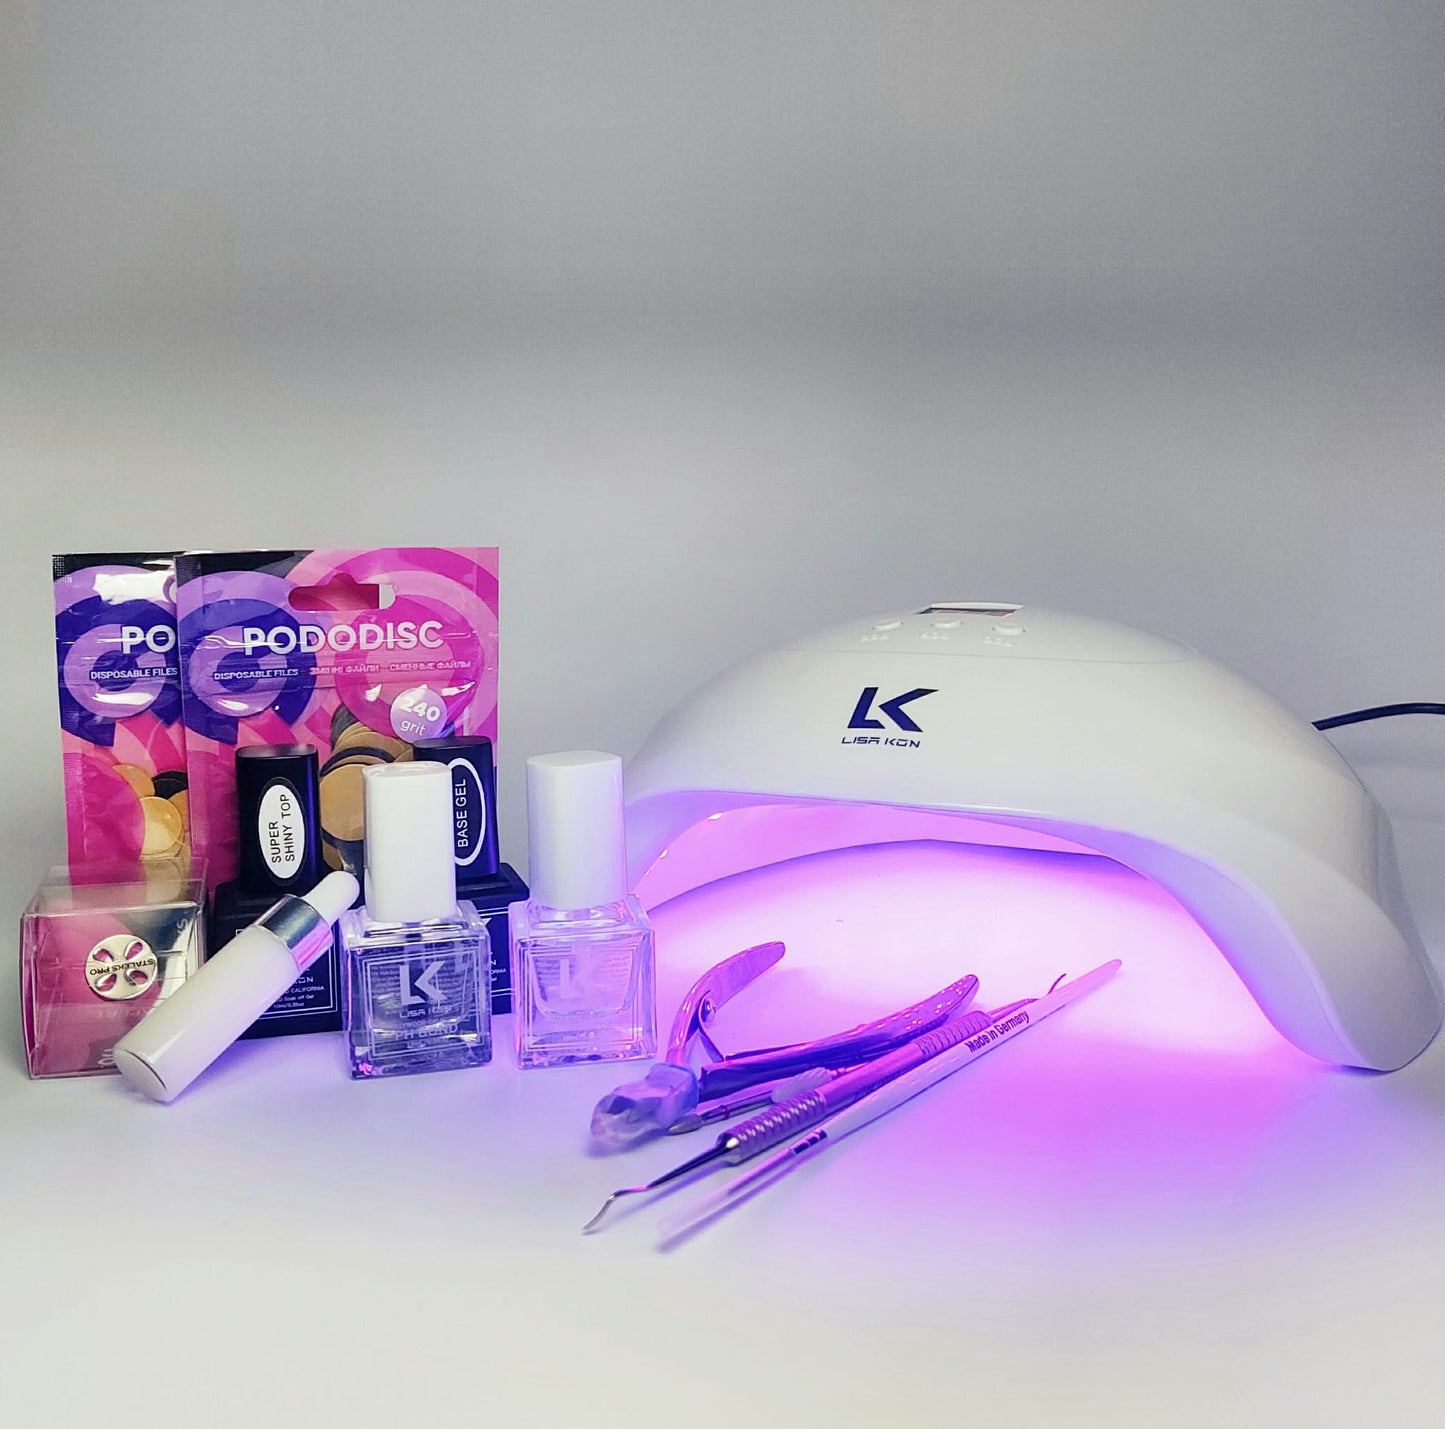 Kit for PEDICURE WEBINAR everything what you need for the course.